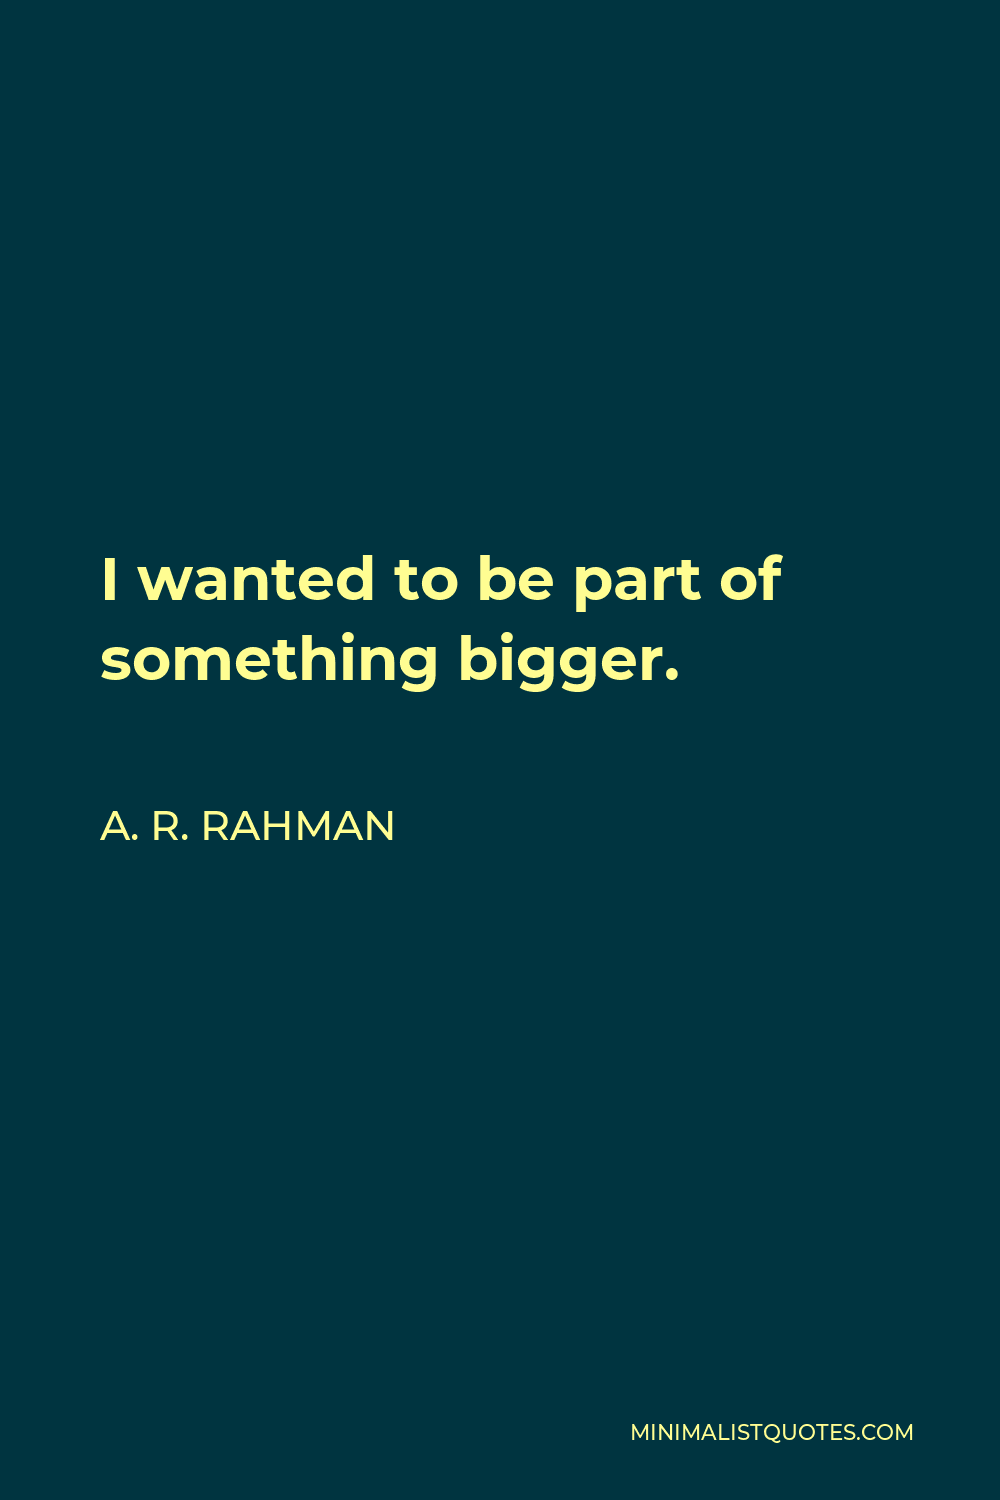 A. R. Rahman Quote - I wanted to be part of something bigger.